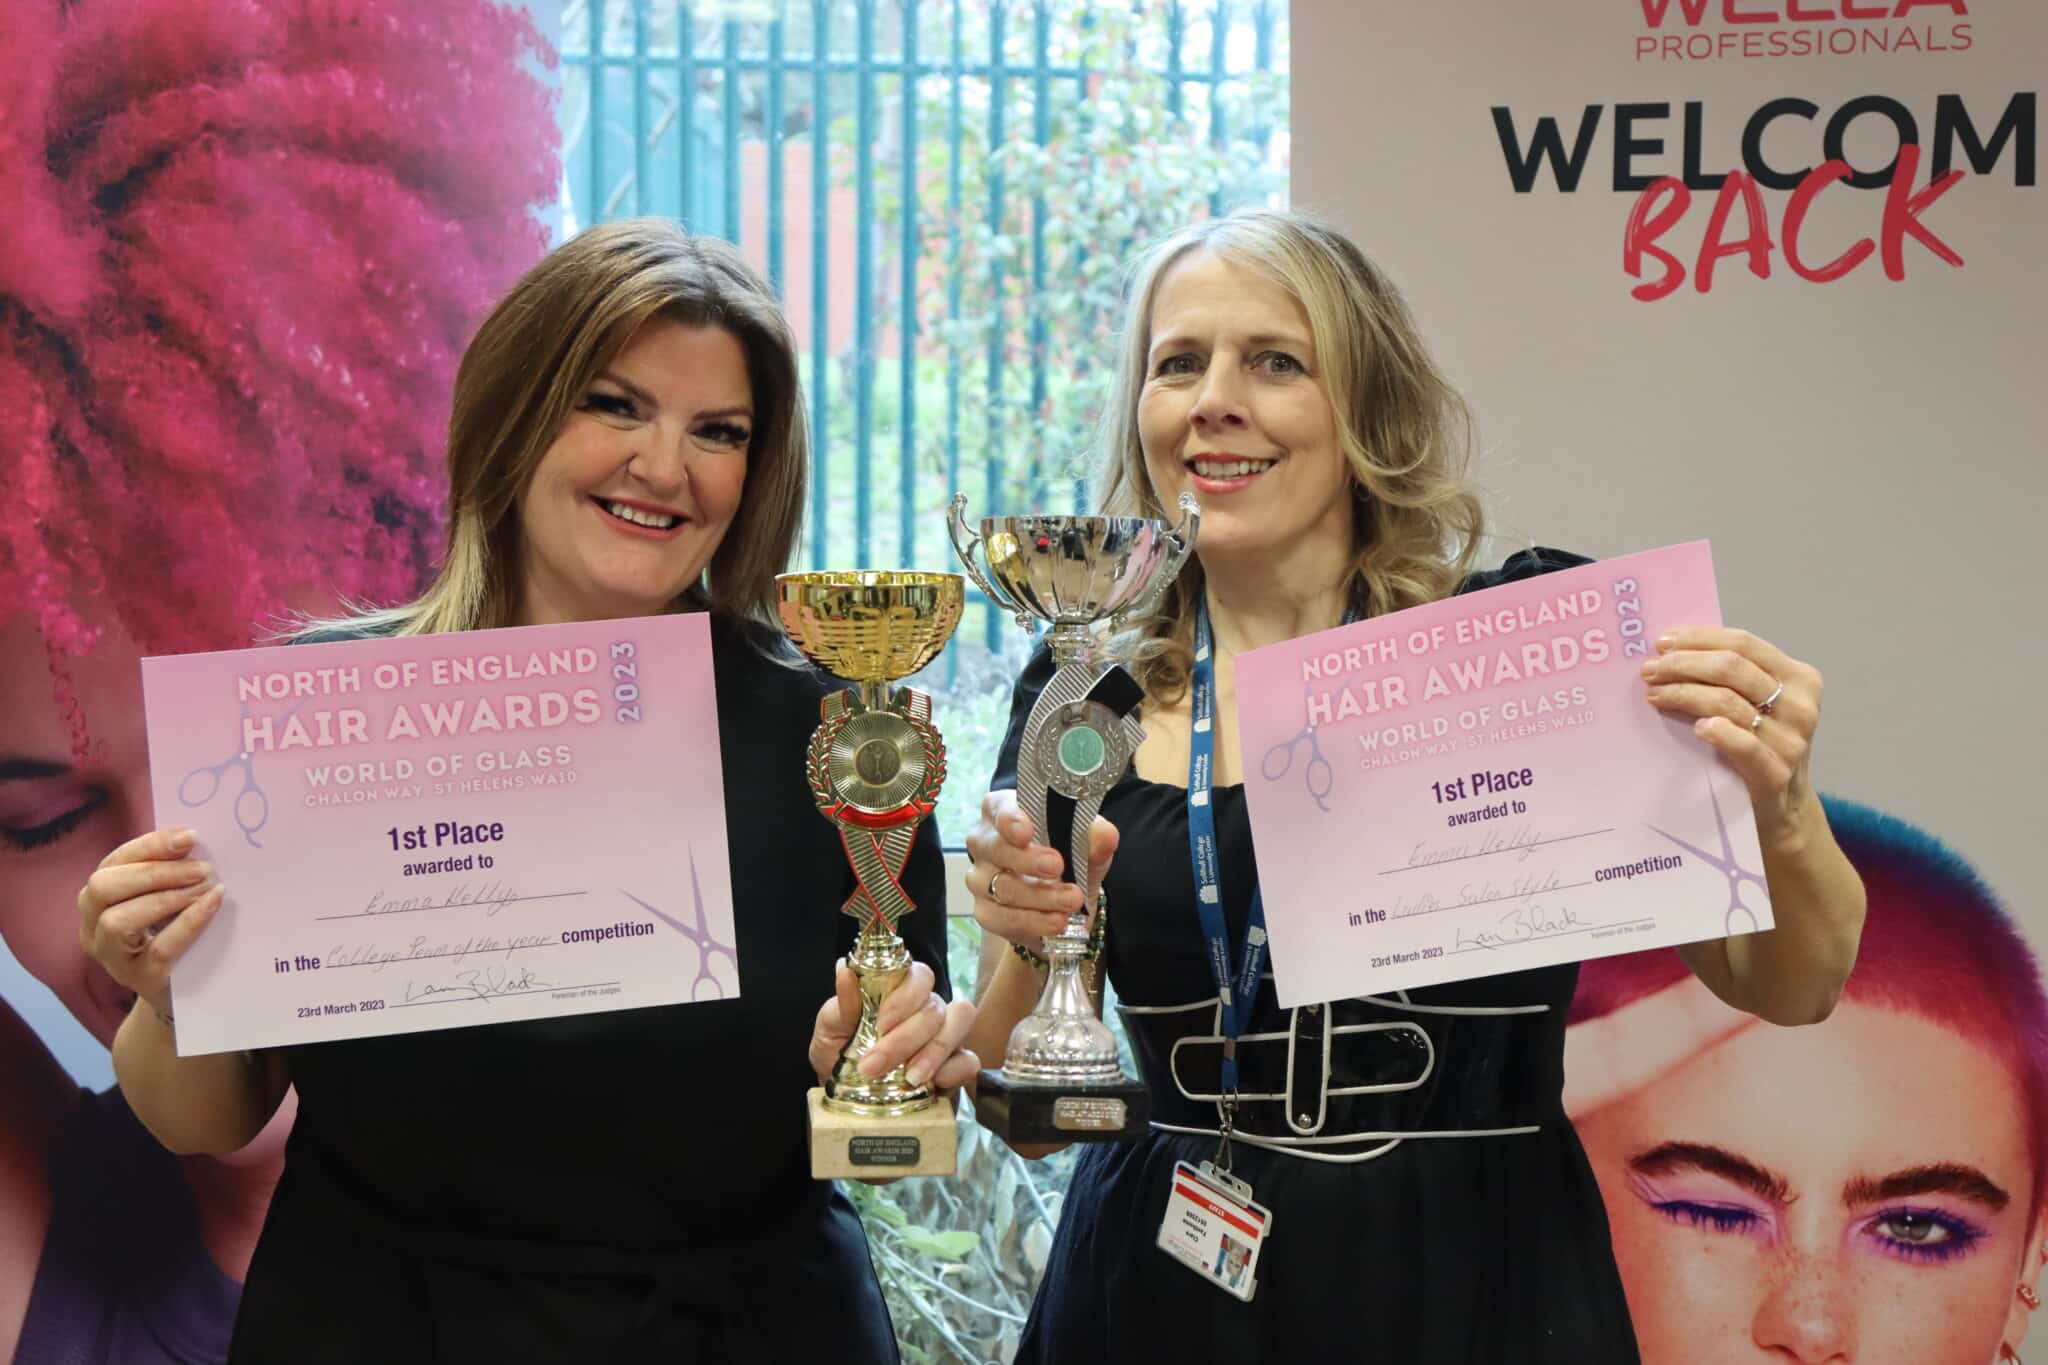 Barbering students win big - 2nd and 3rd place cups and certificates held